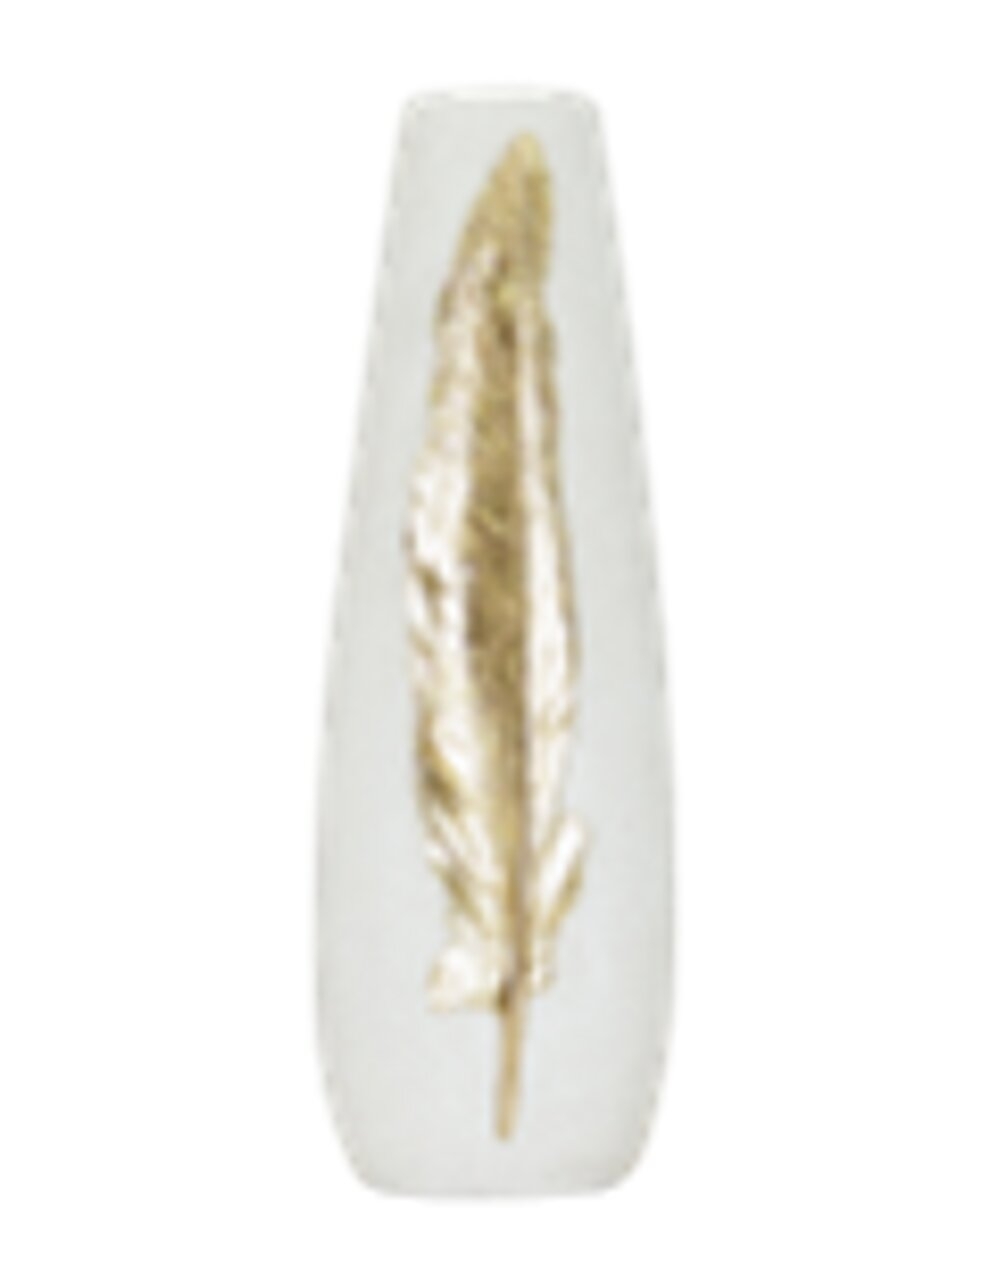 Mindy Brownes Feather White Ornamental And Gold Large Vase Set Of 2